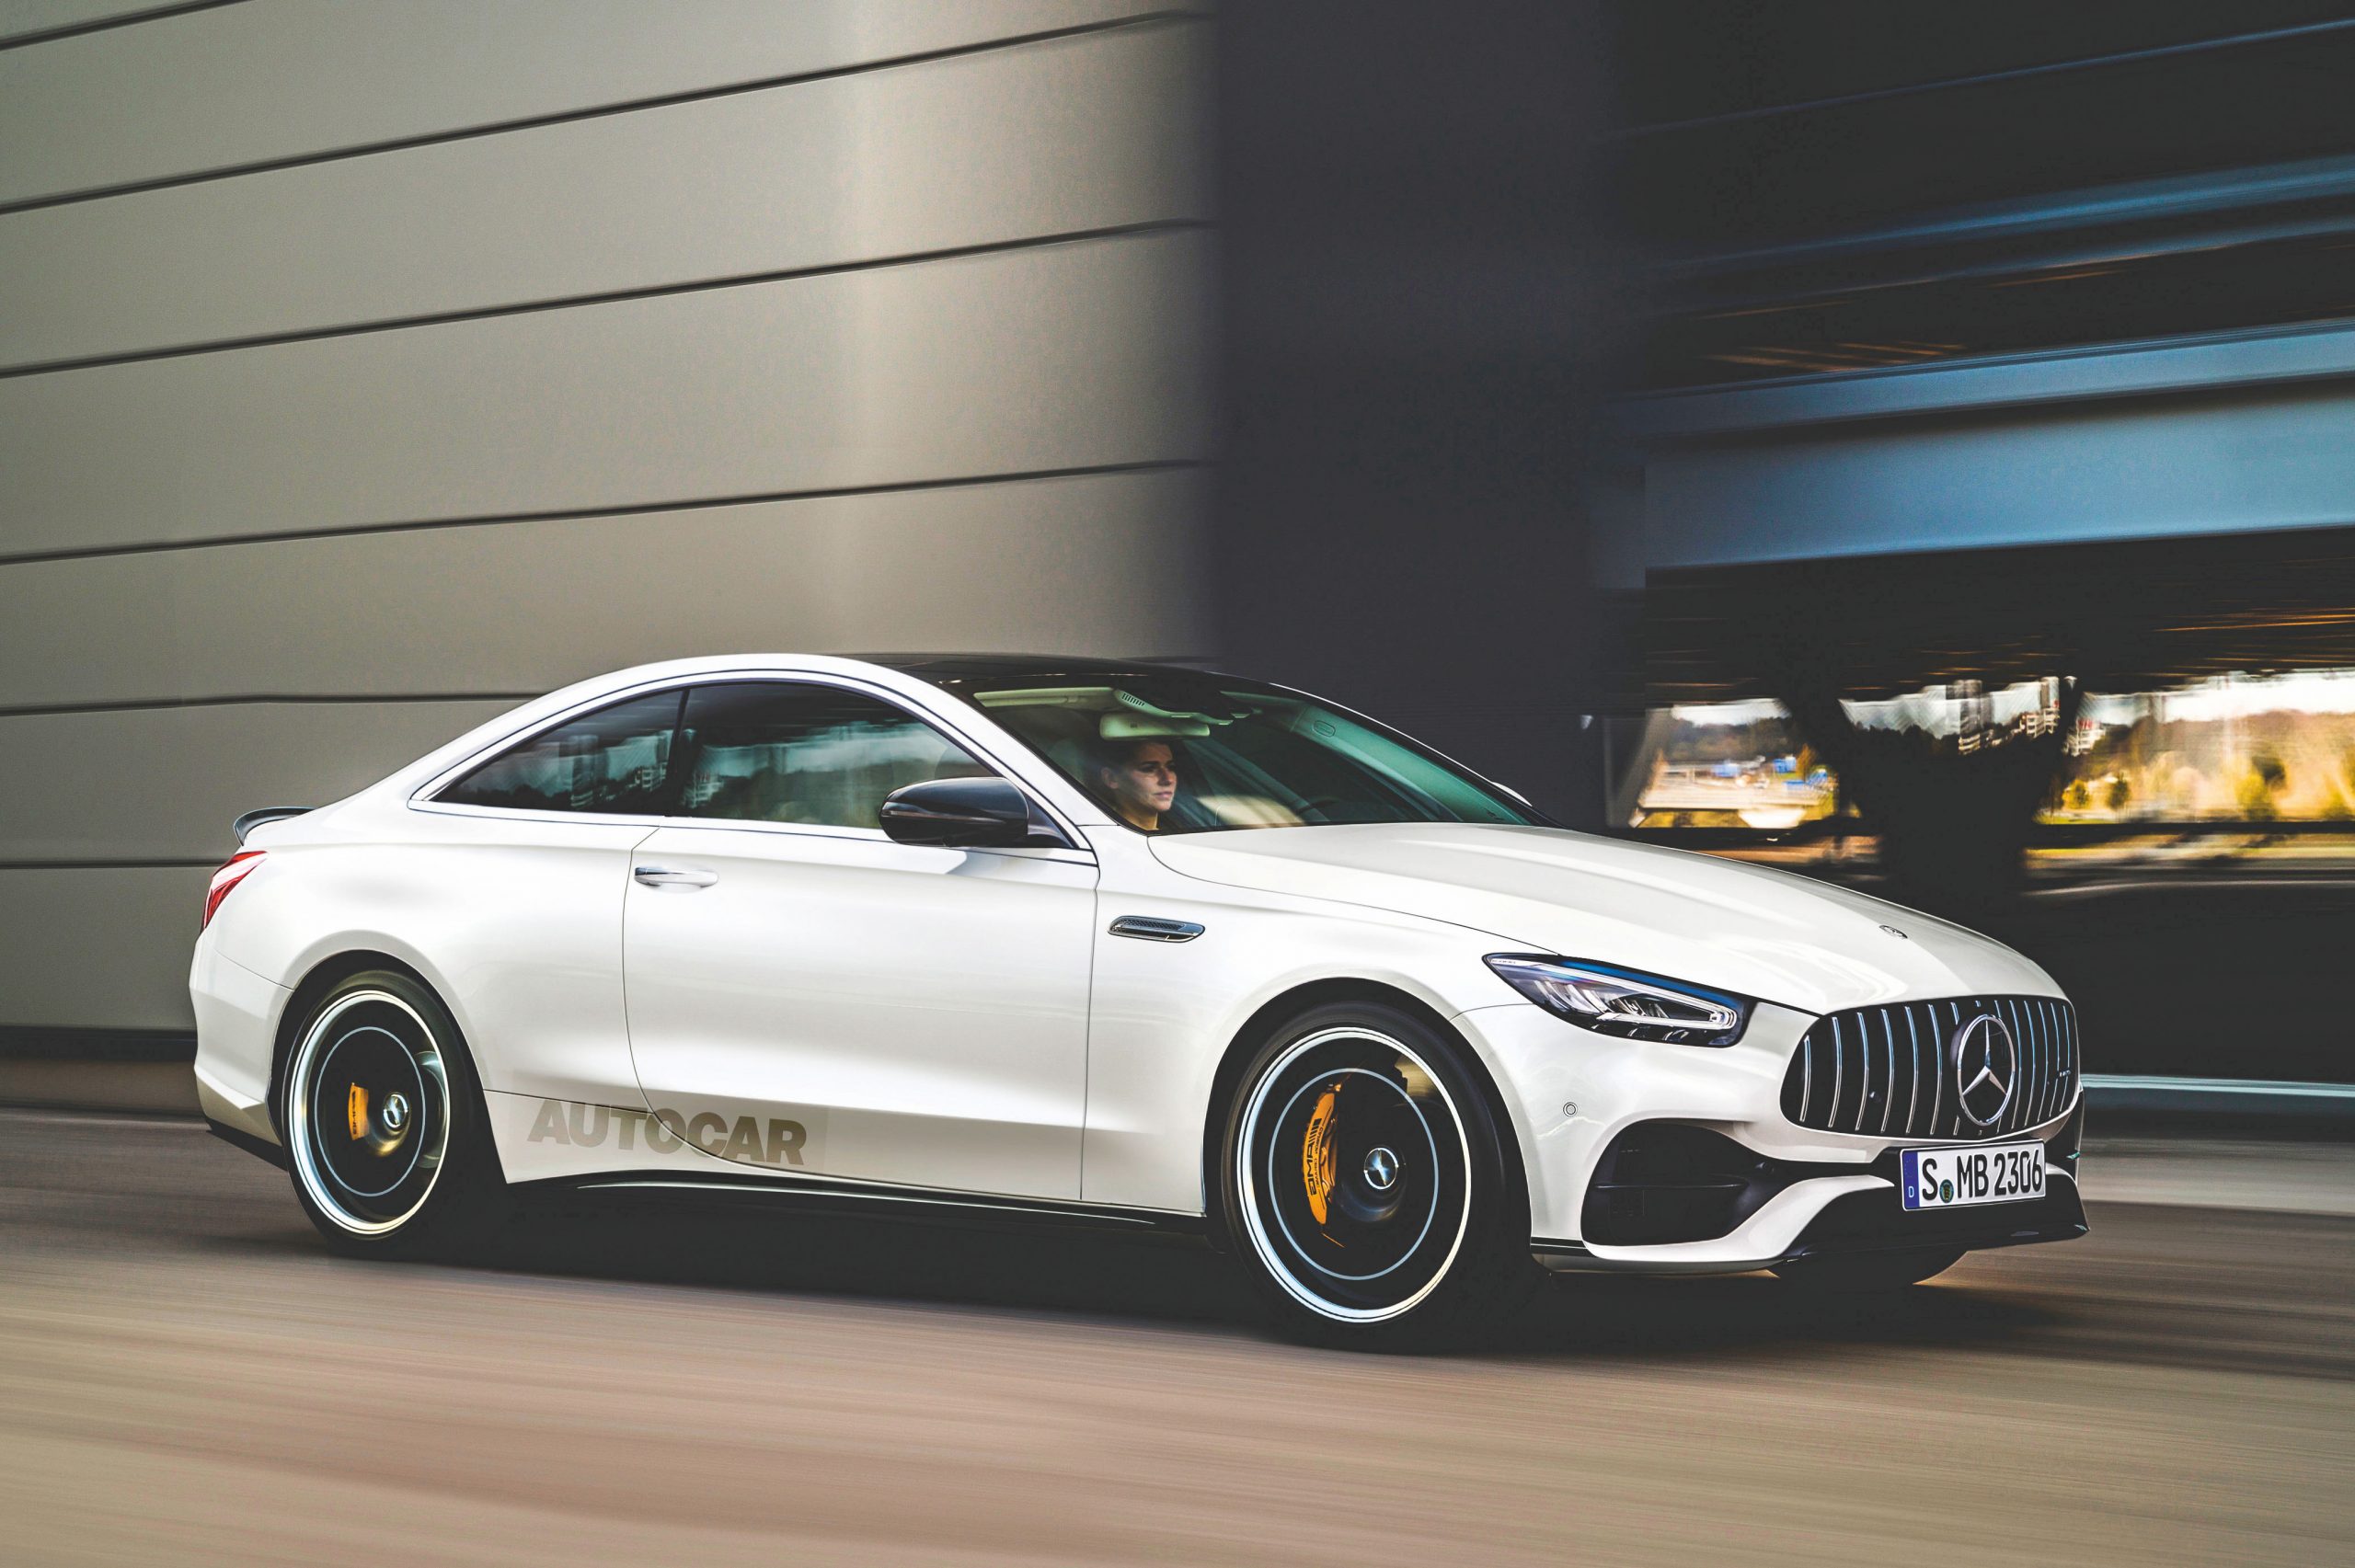 Next Gen Mercedes Amg C63 S To Pack 522 Hp 3 Kw From 2 0 Litre Turbo Hybrid Says Report